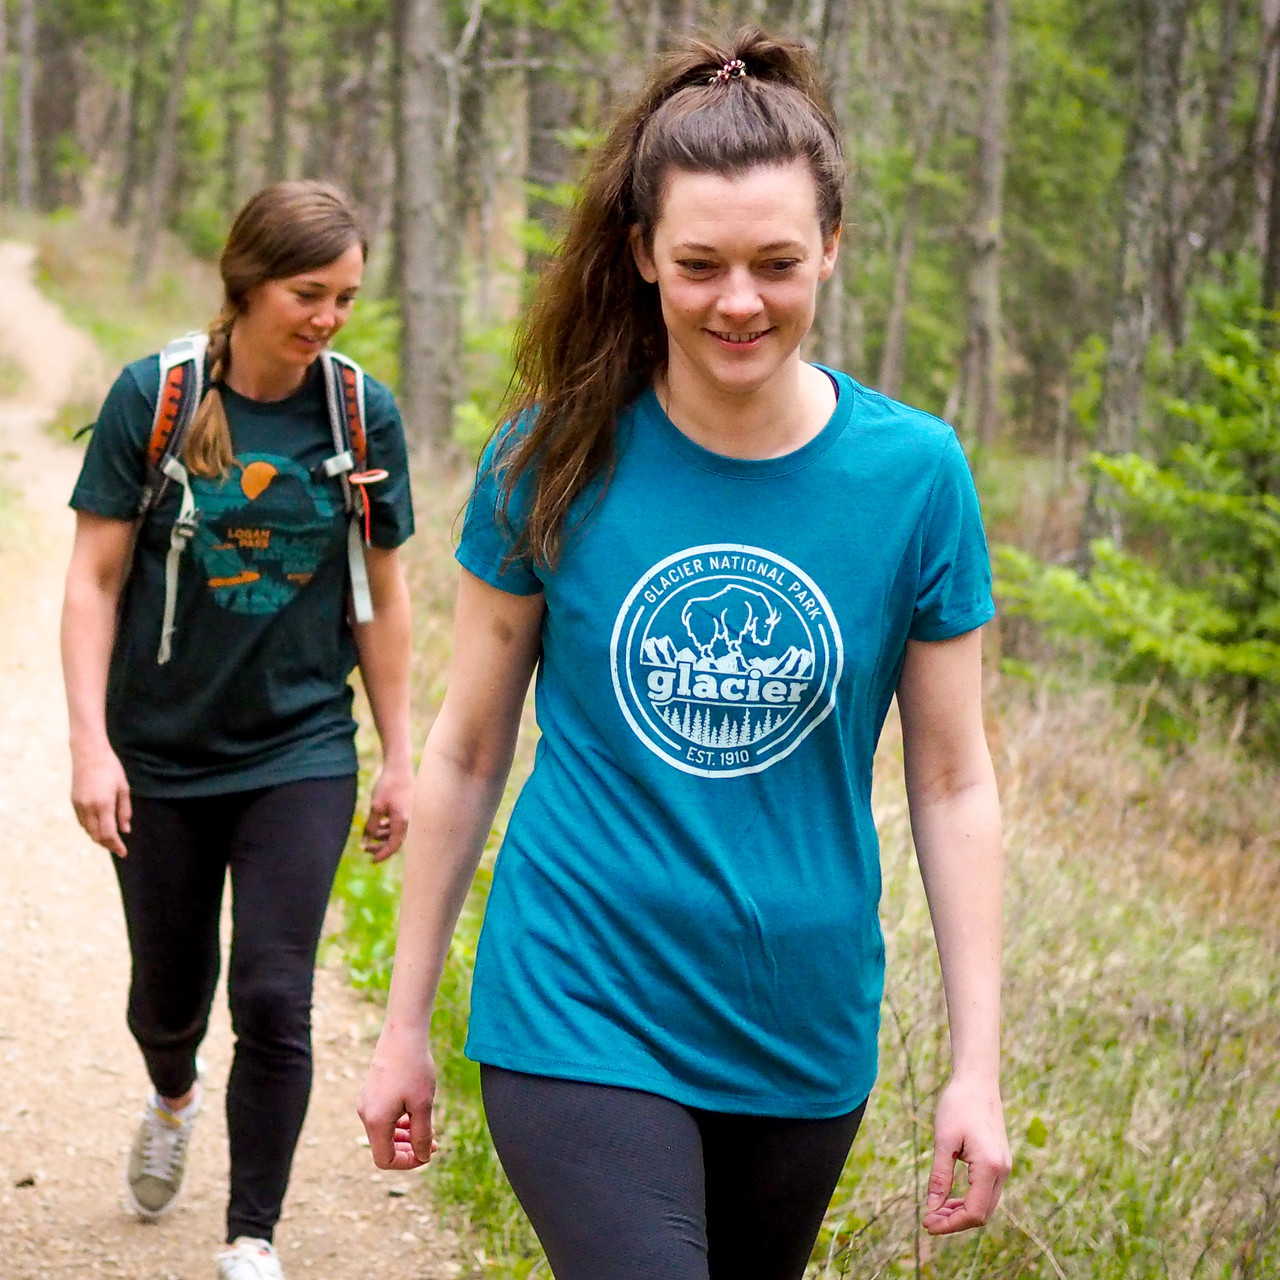 Women's Teal Shirt with Goat Glacier Conservancy